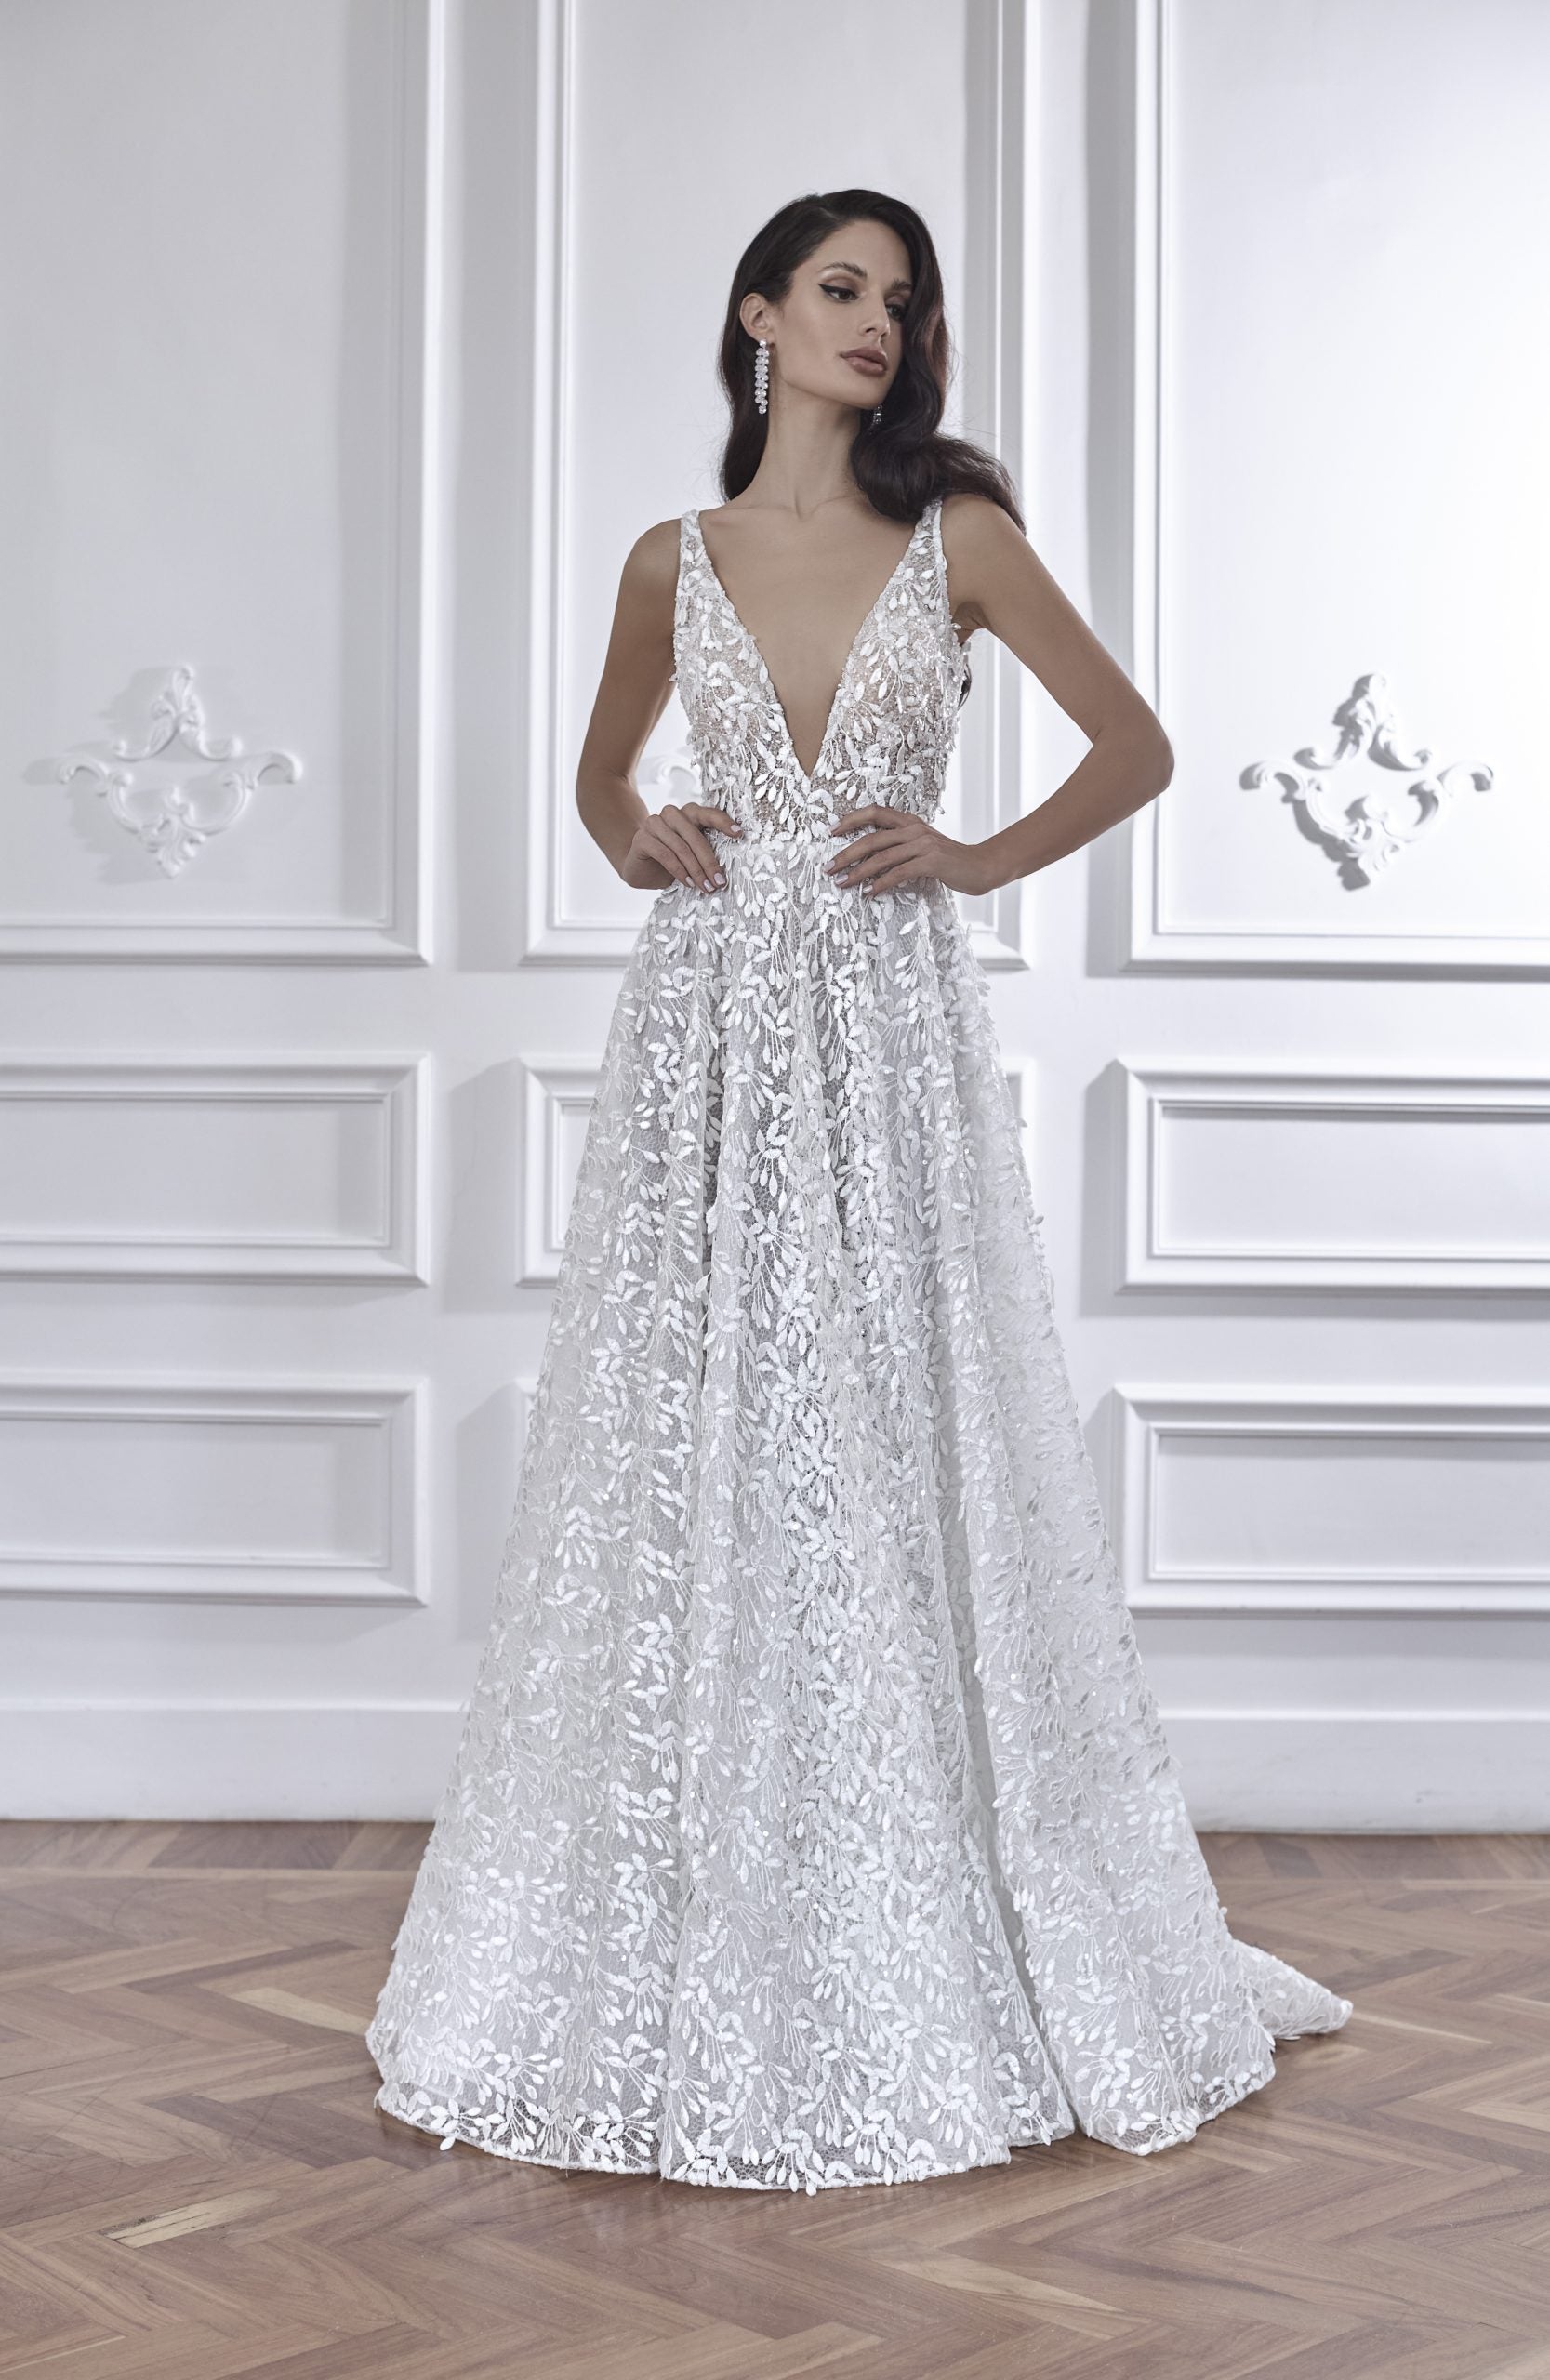 Sleeveless A-line Wedding Dress With Open Back by Maison Signore - Image 1